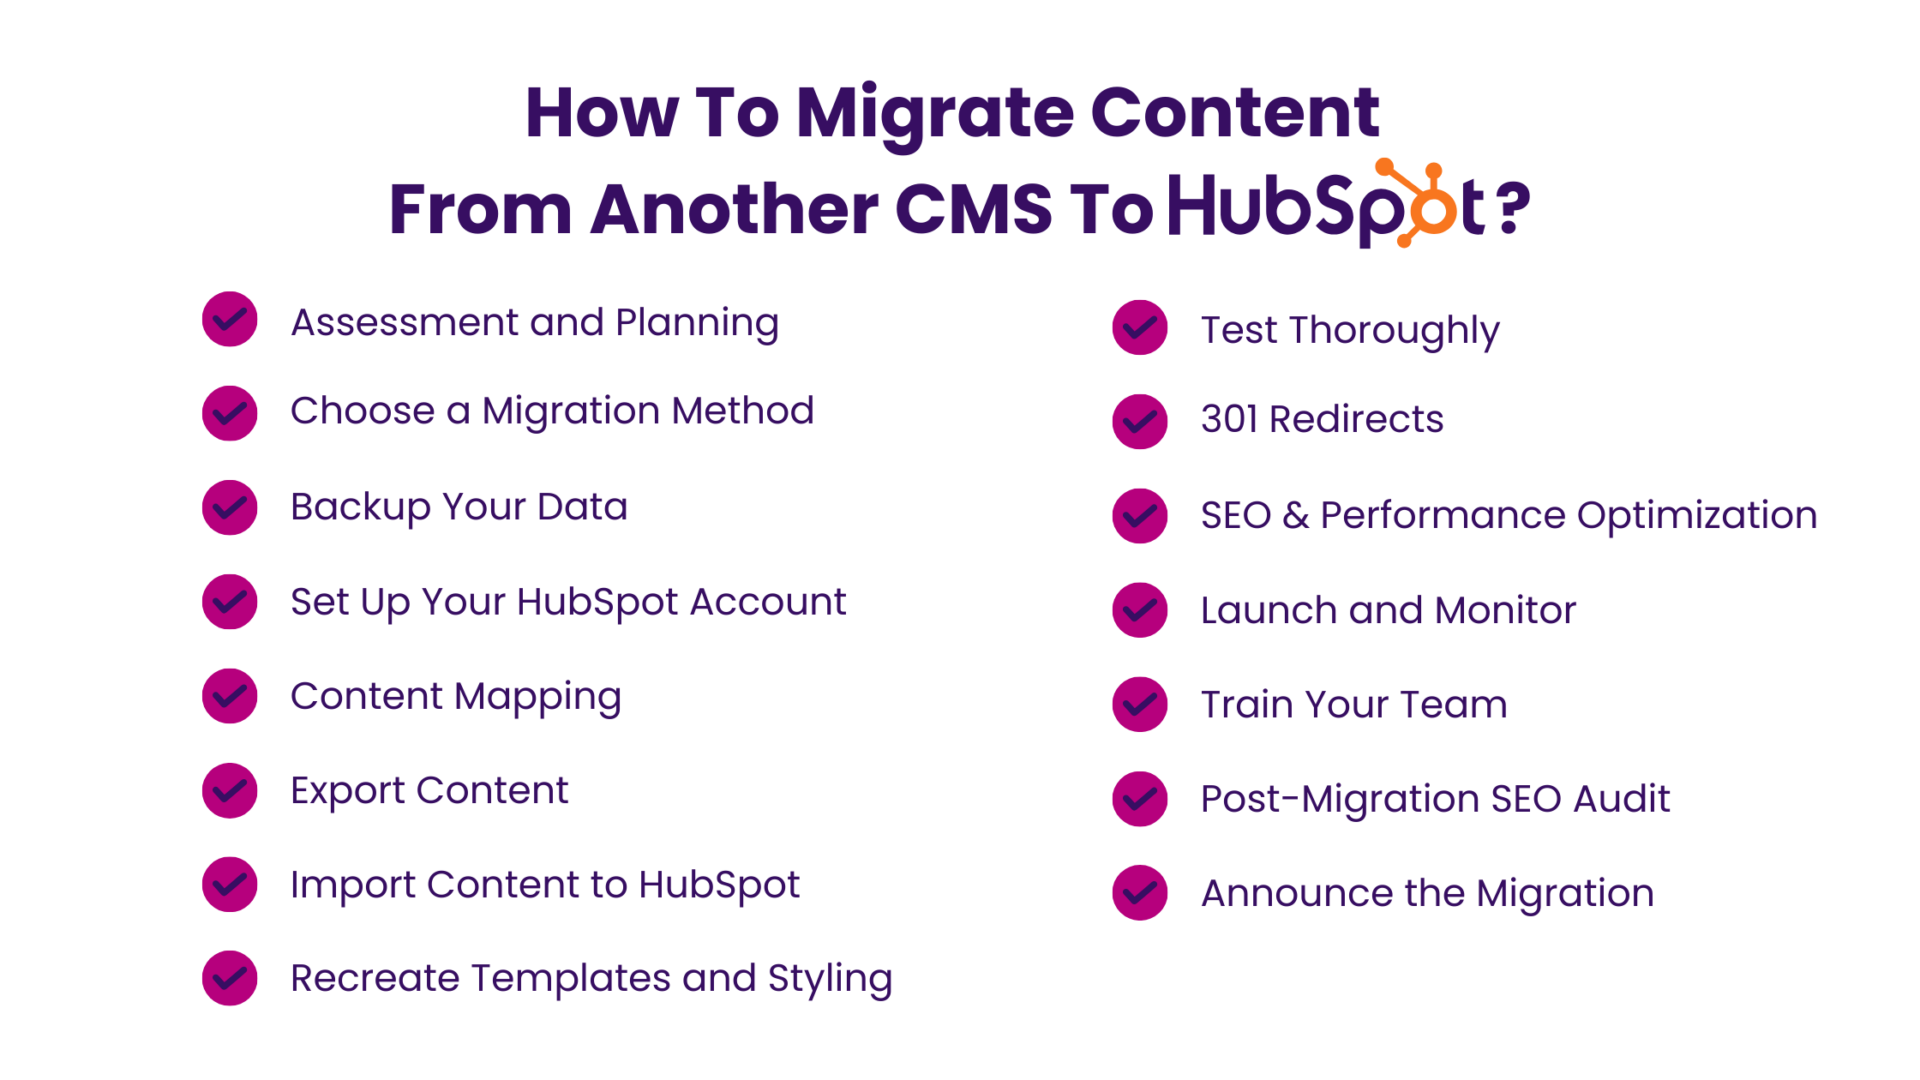 How To Migrate Content From Another CMS To HubSpot